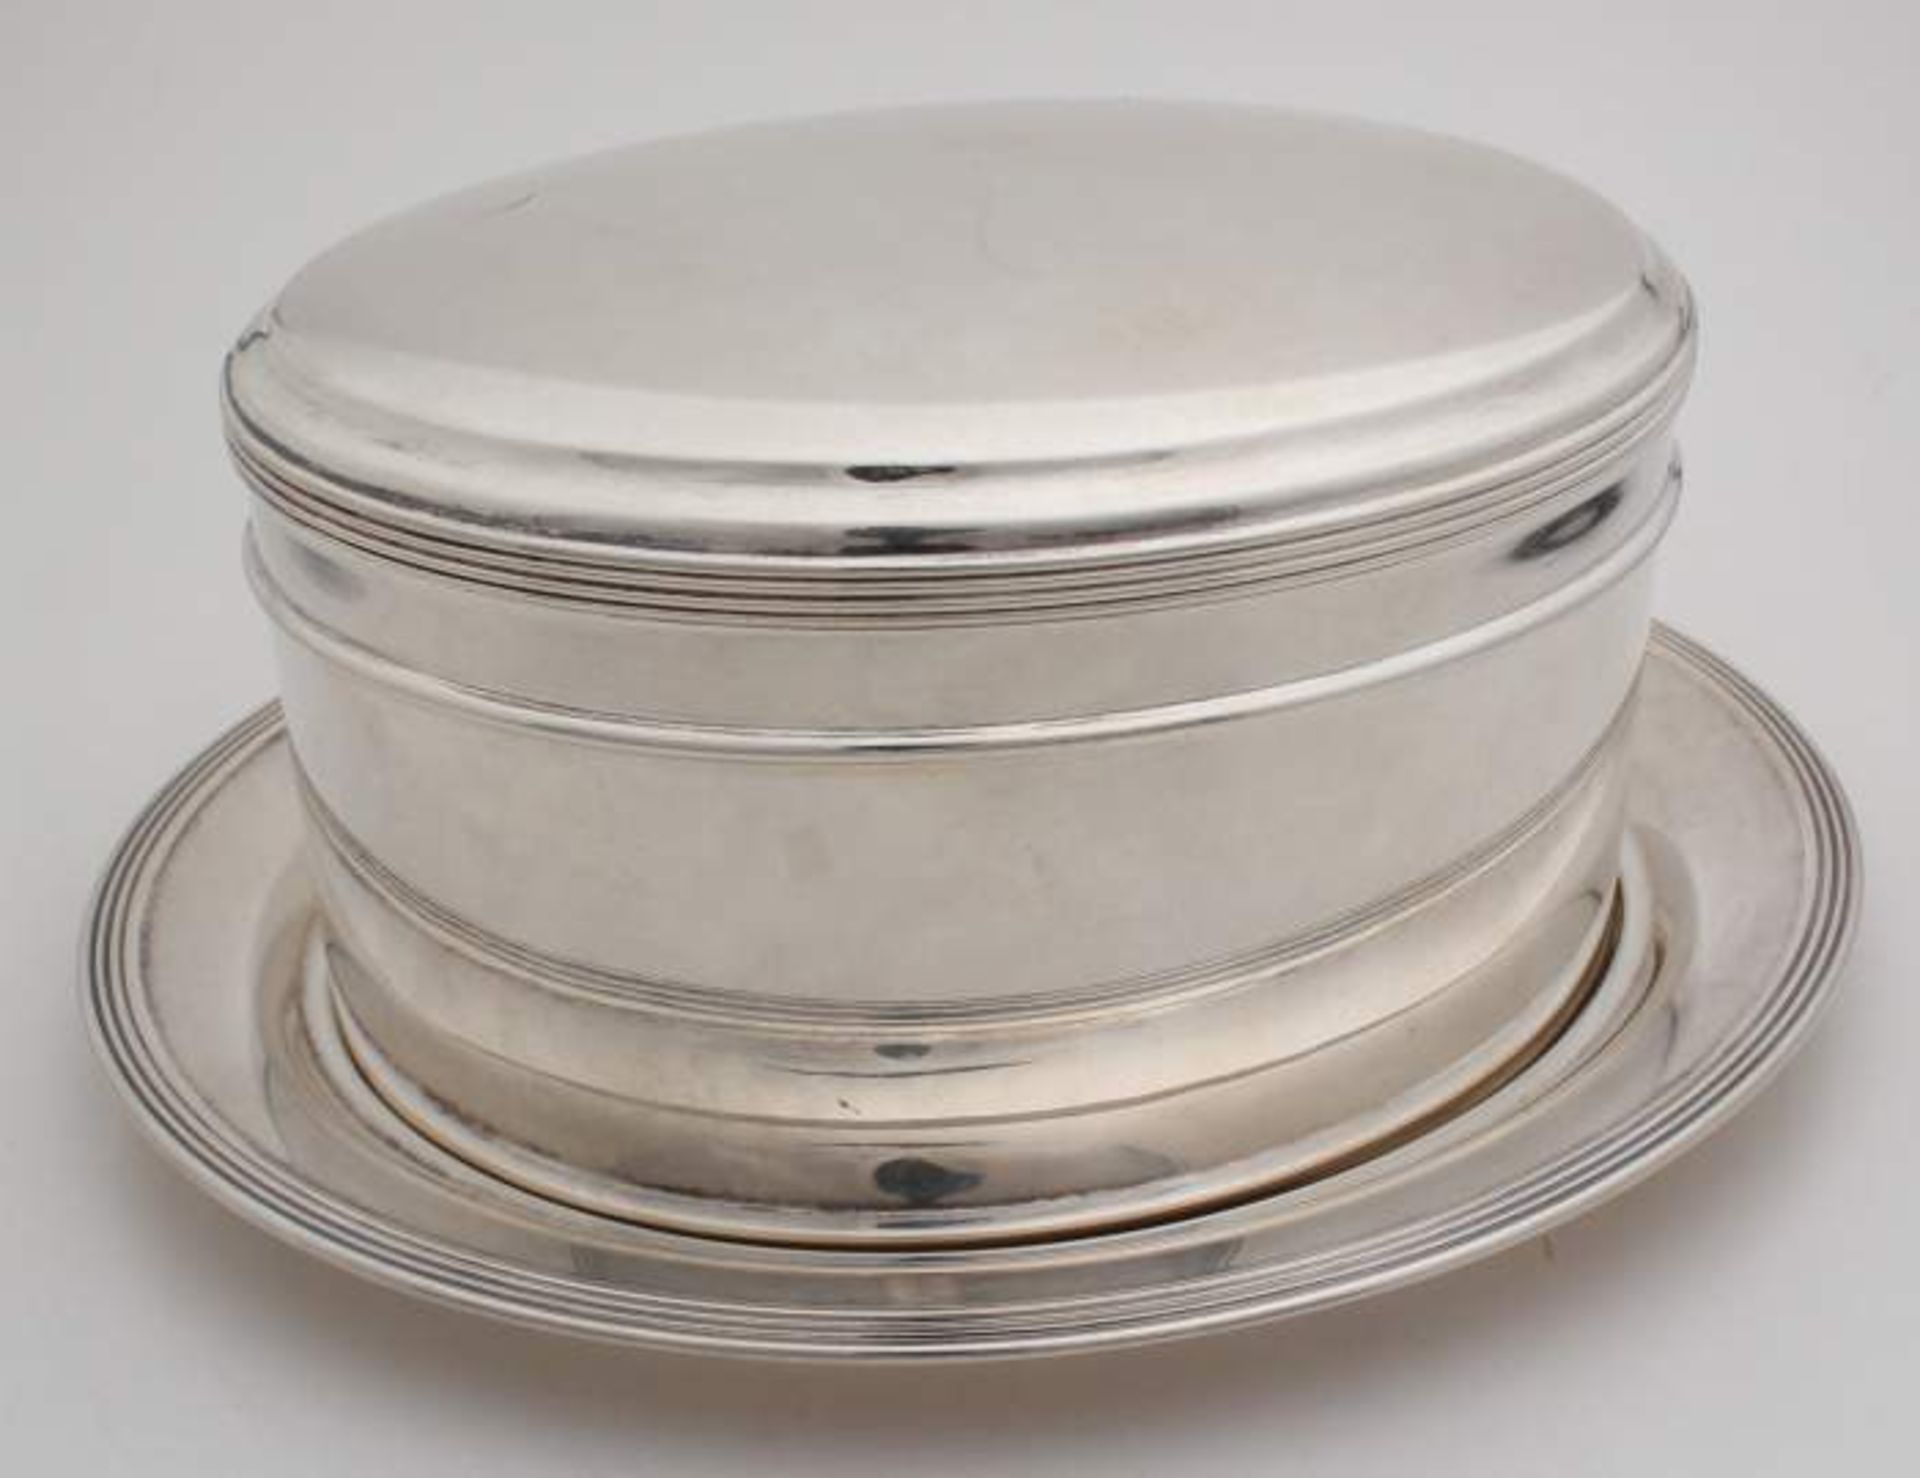 Beautiful silver biscuit tin with saucer, Dutch 835/000. Oval smooth biscuit tin decorated with